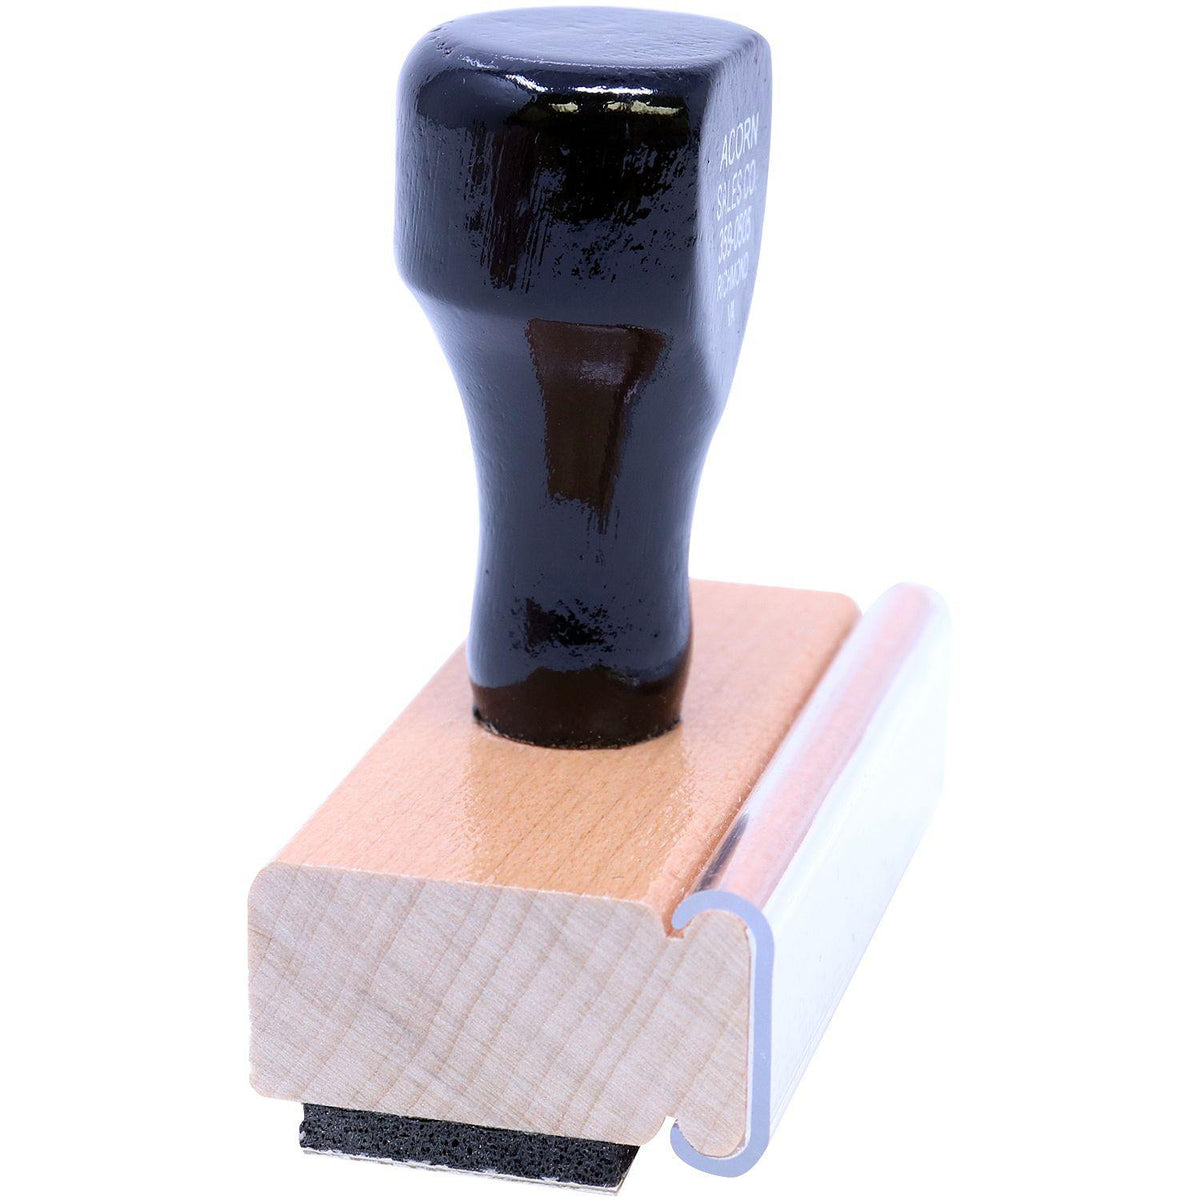 Narrow Confidential Rubber Stamp - Engineer Seal Stamps - Brand_Acorn, Impression Size_Small, Stamp Type_Regular Stamp, Type of Use_General, Type of Use_Office, Type of Use_Professional